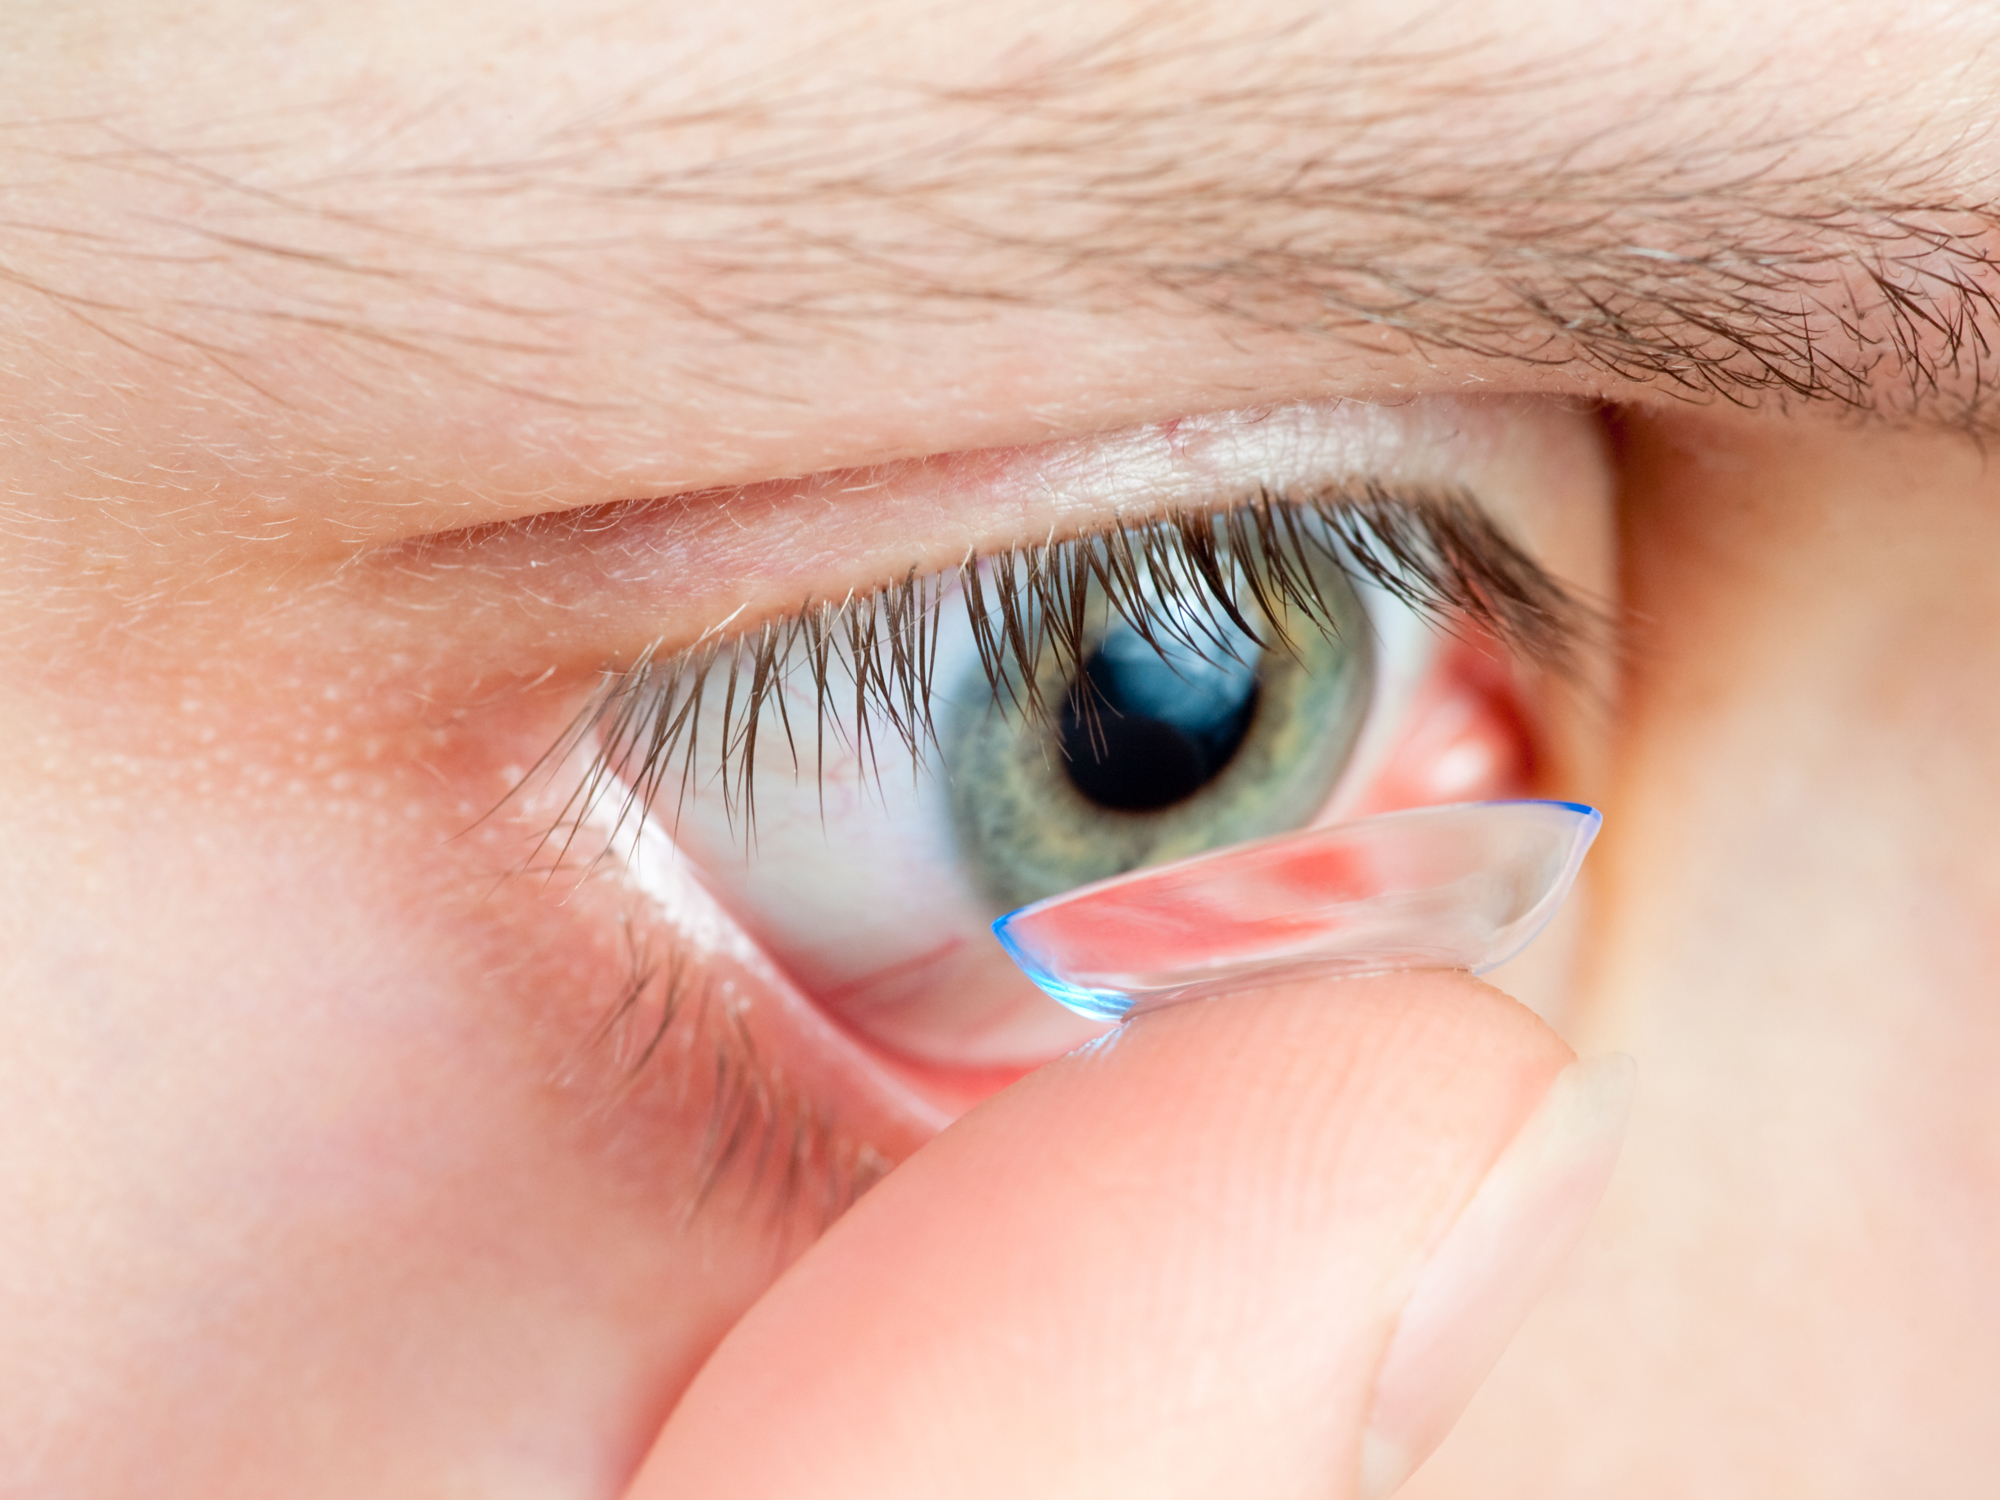 The contact lens infection that can steal your sight